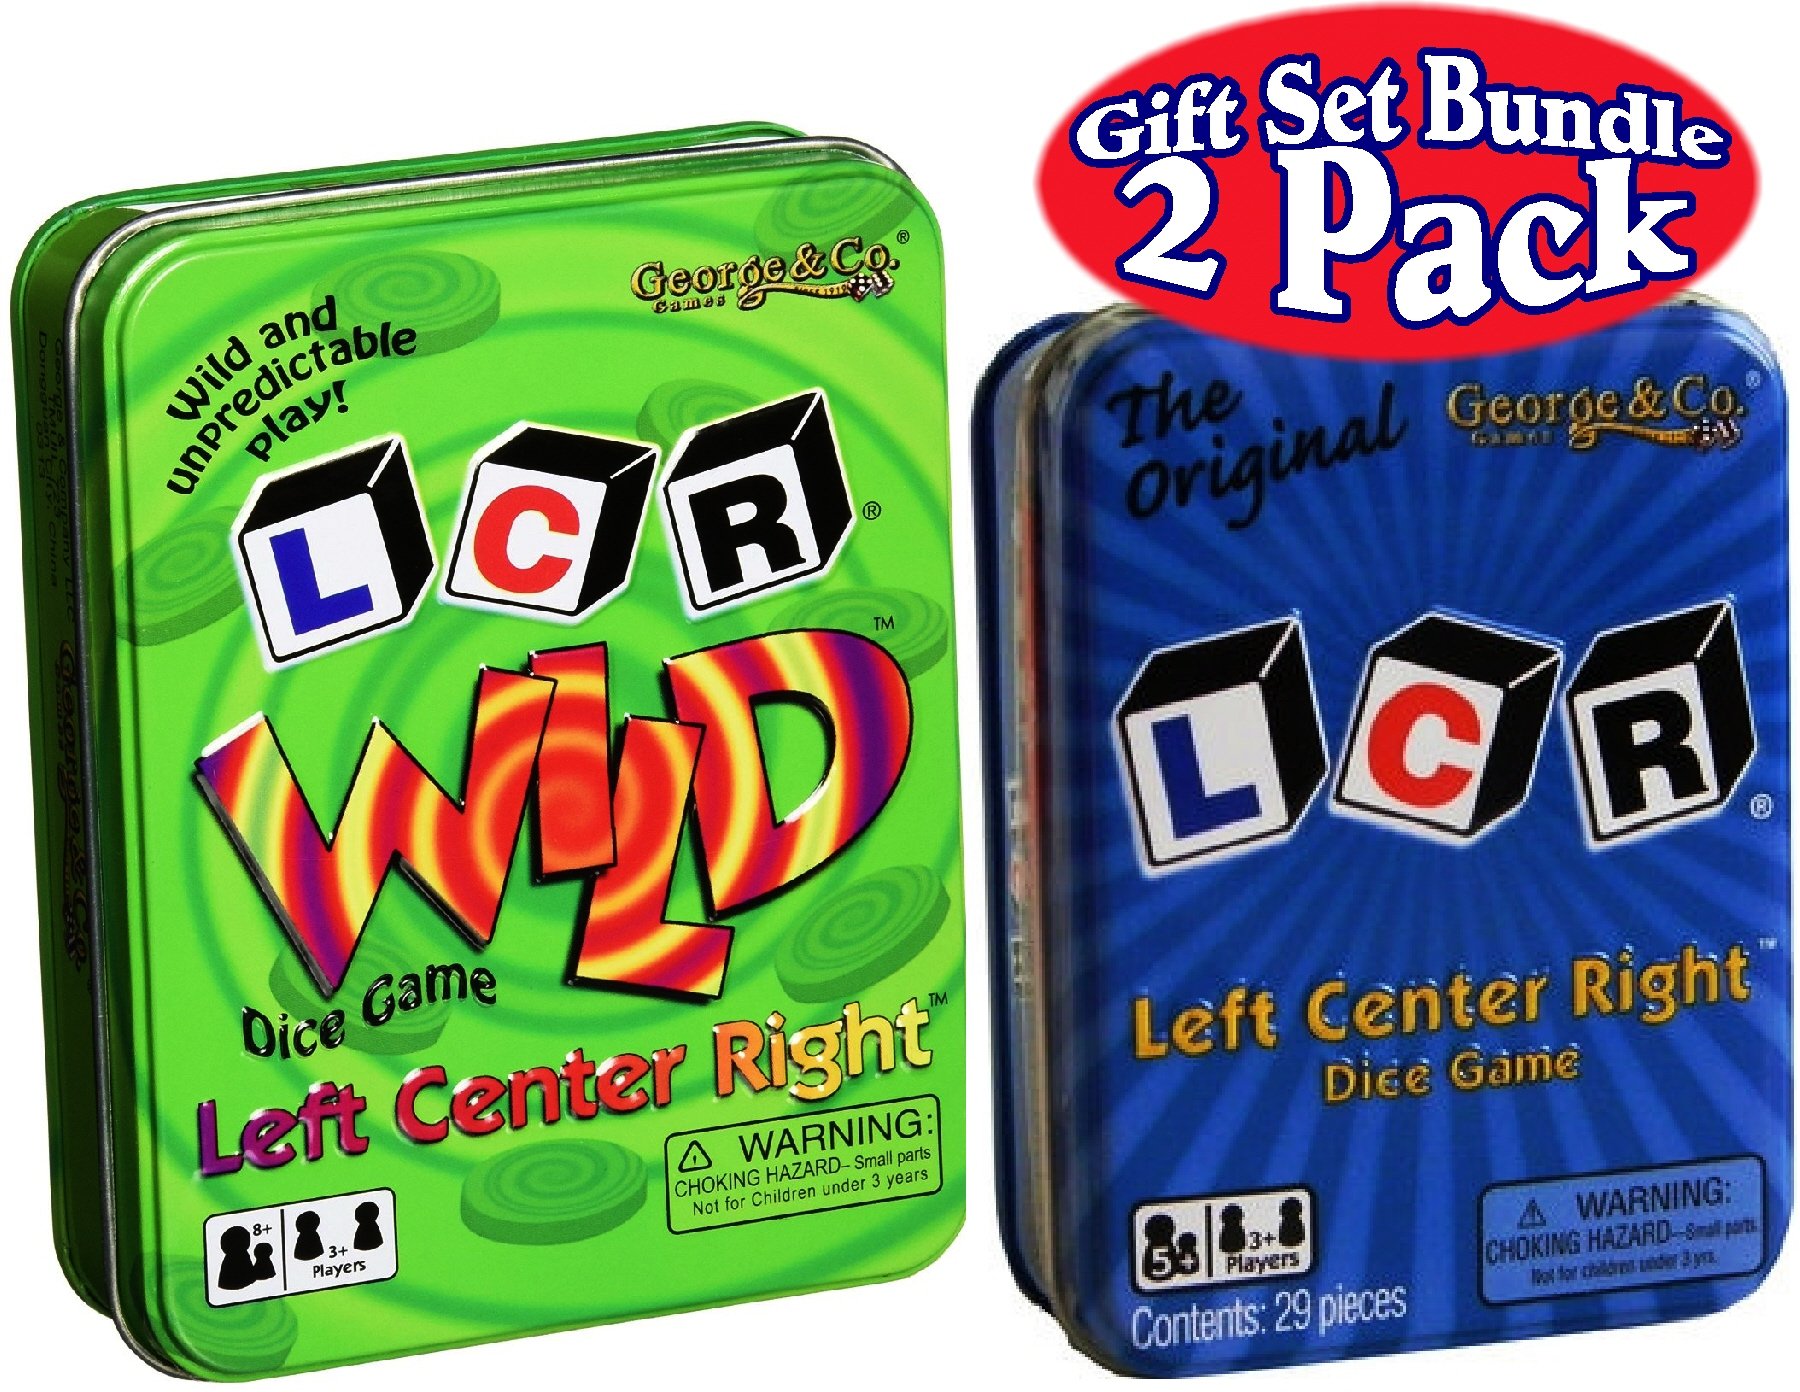 LCR (Left Right Center) Dice Game in Blue Tin & LCR Wild Dice Game in Green Tin Gift Set Bundle - 2 Pack